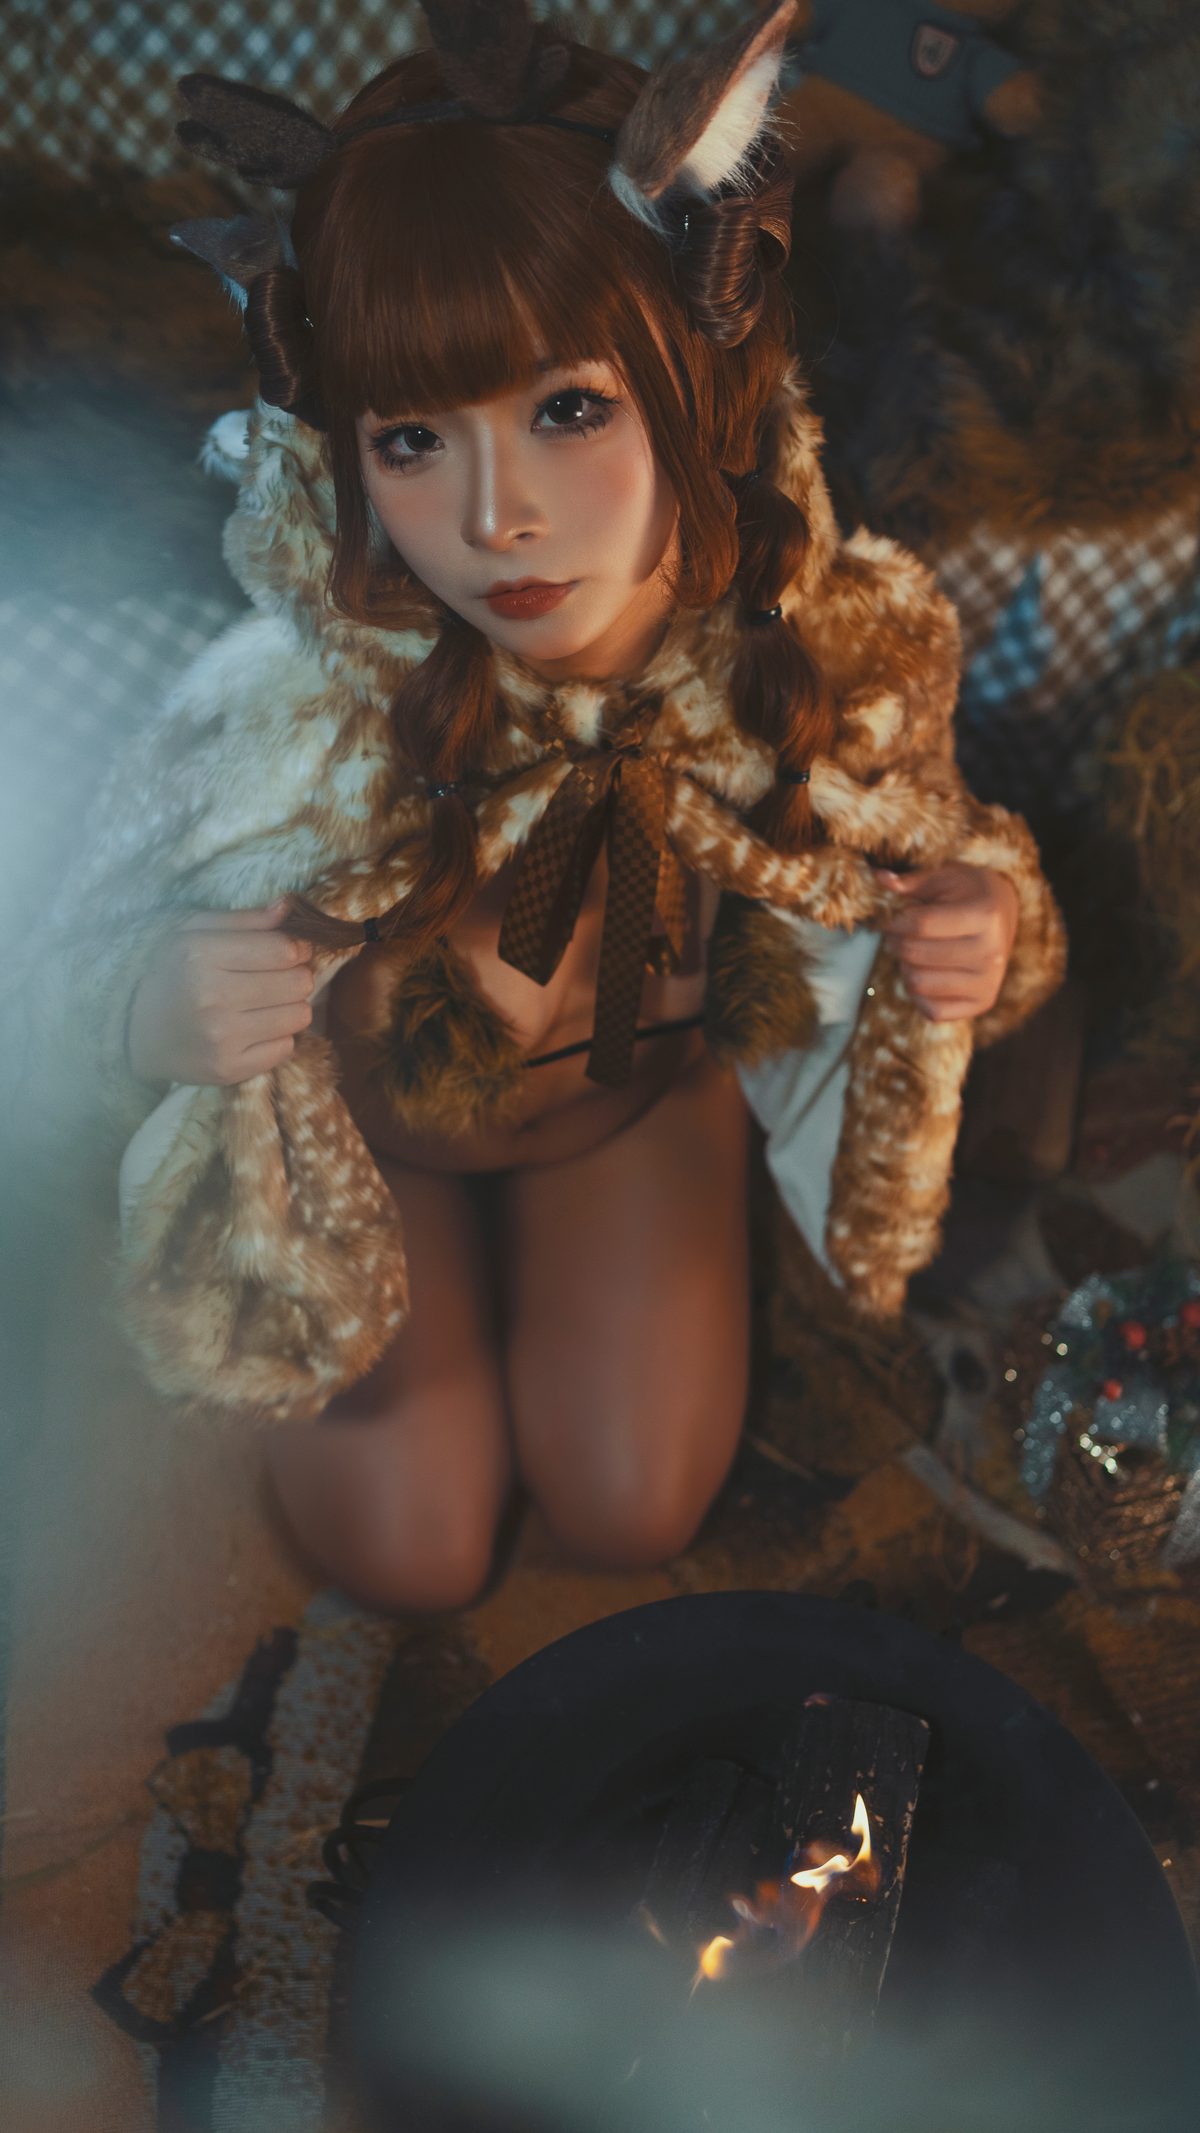 Coser@Kokuhui Vol 017 Escape from Christmas Eve 0073 6205924787.jpg